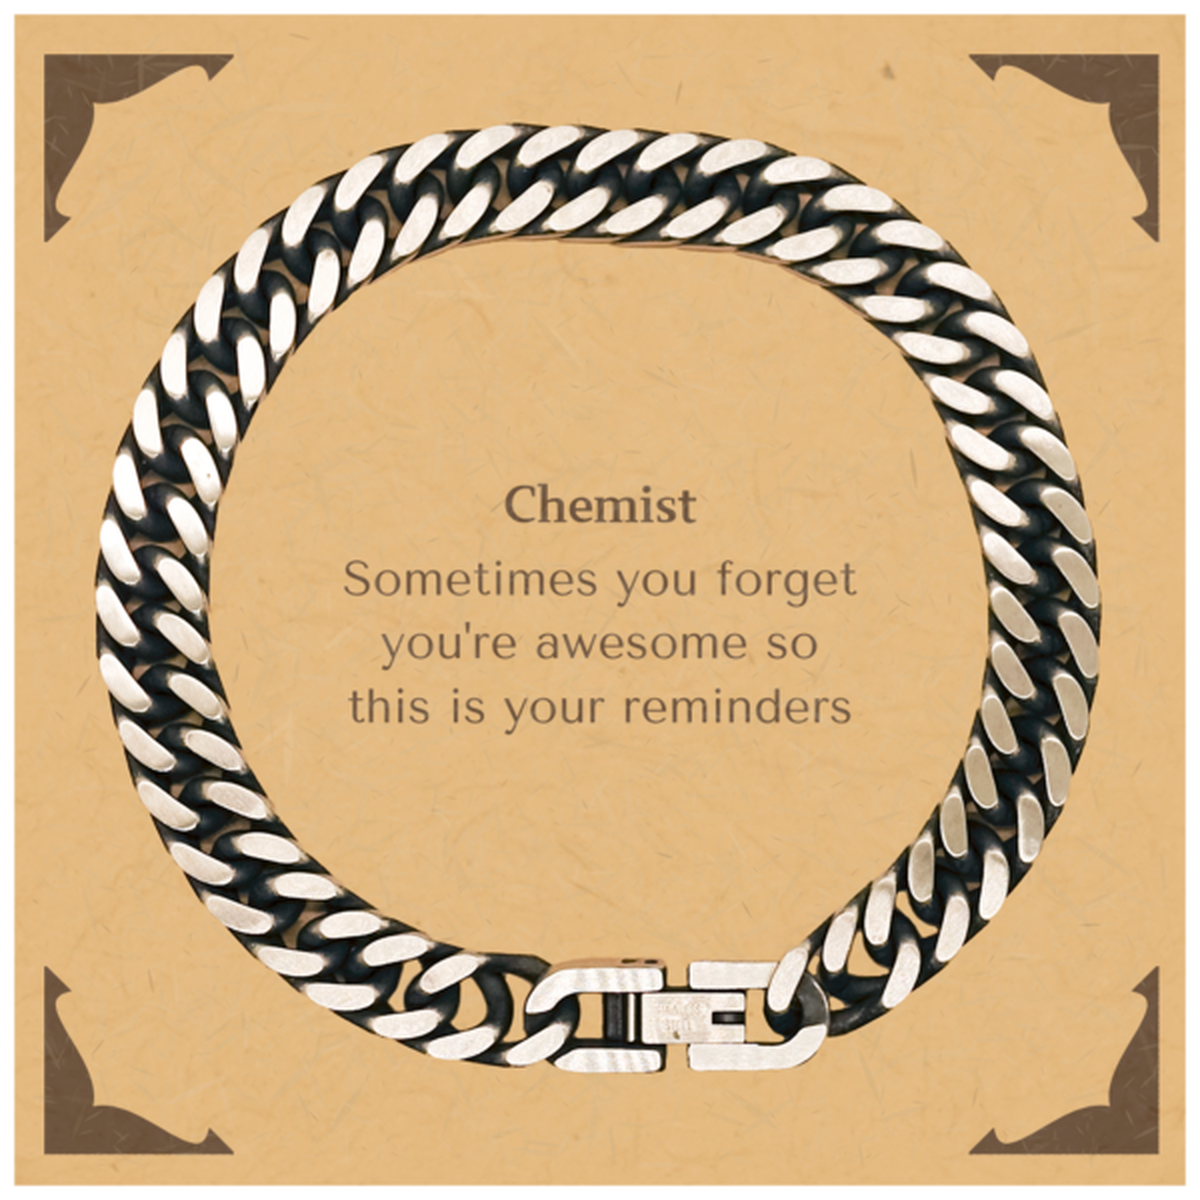 Sentimental Chemist Cuban Link Chain Bracelet, Chemist Sometimes you forget you're awesome so this is your reminders, Graduation Christmas Birthday Gifts for Chemist, Men, Women, Coworkers